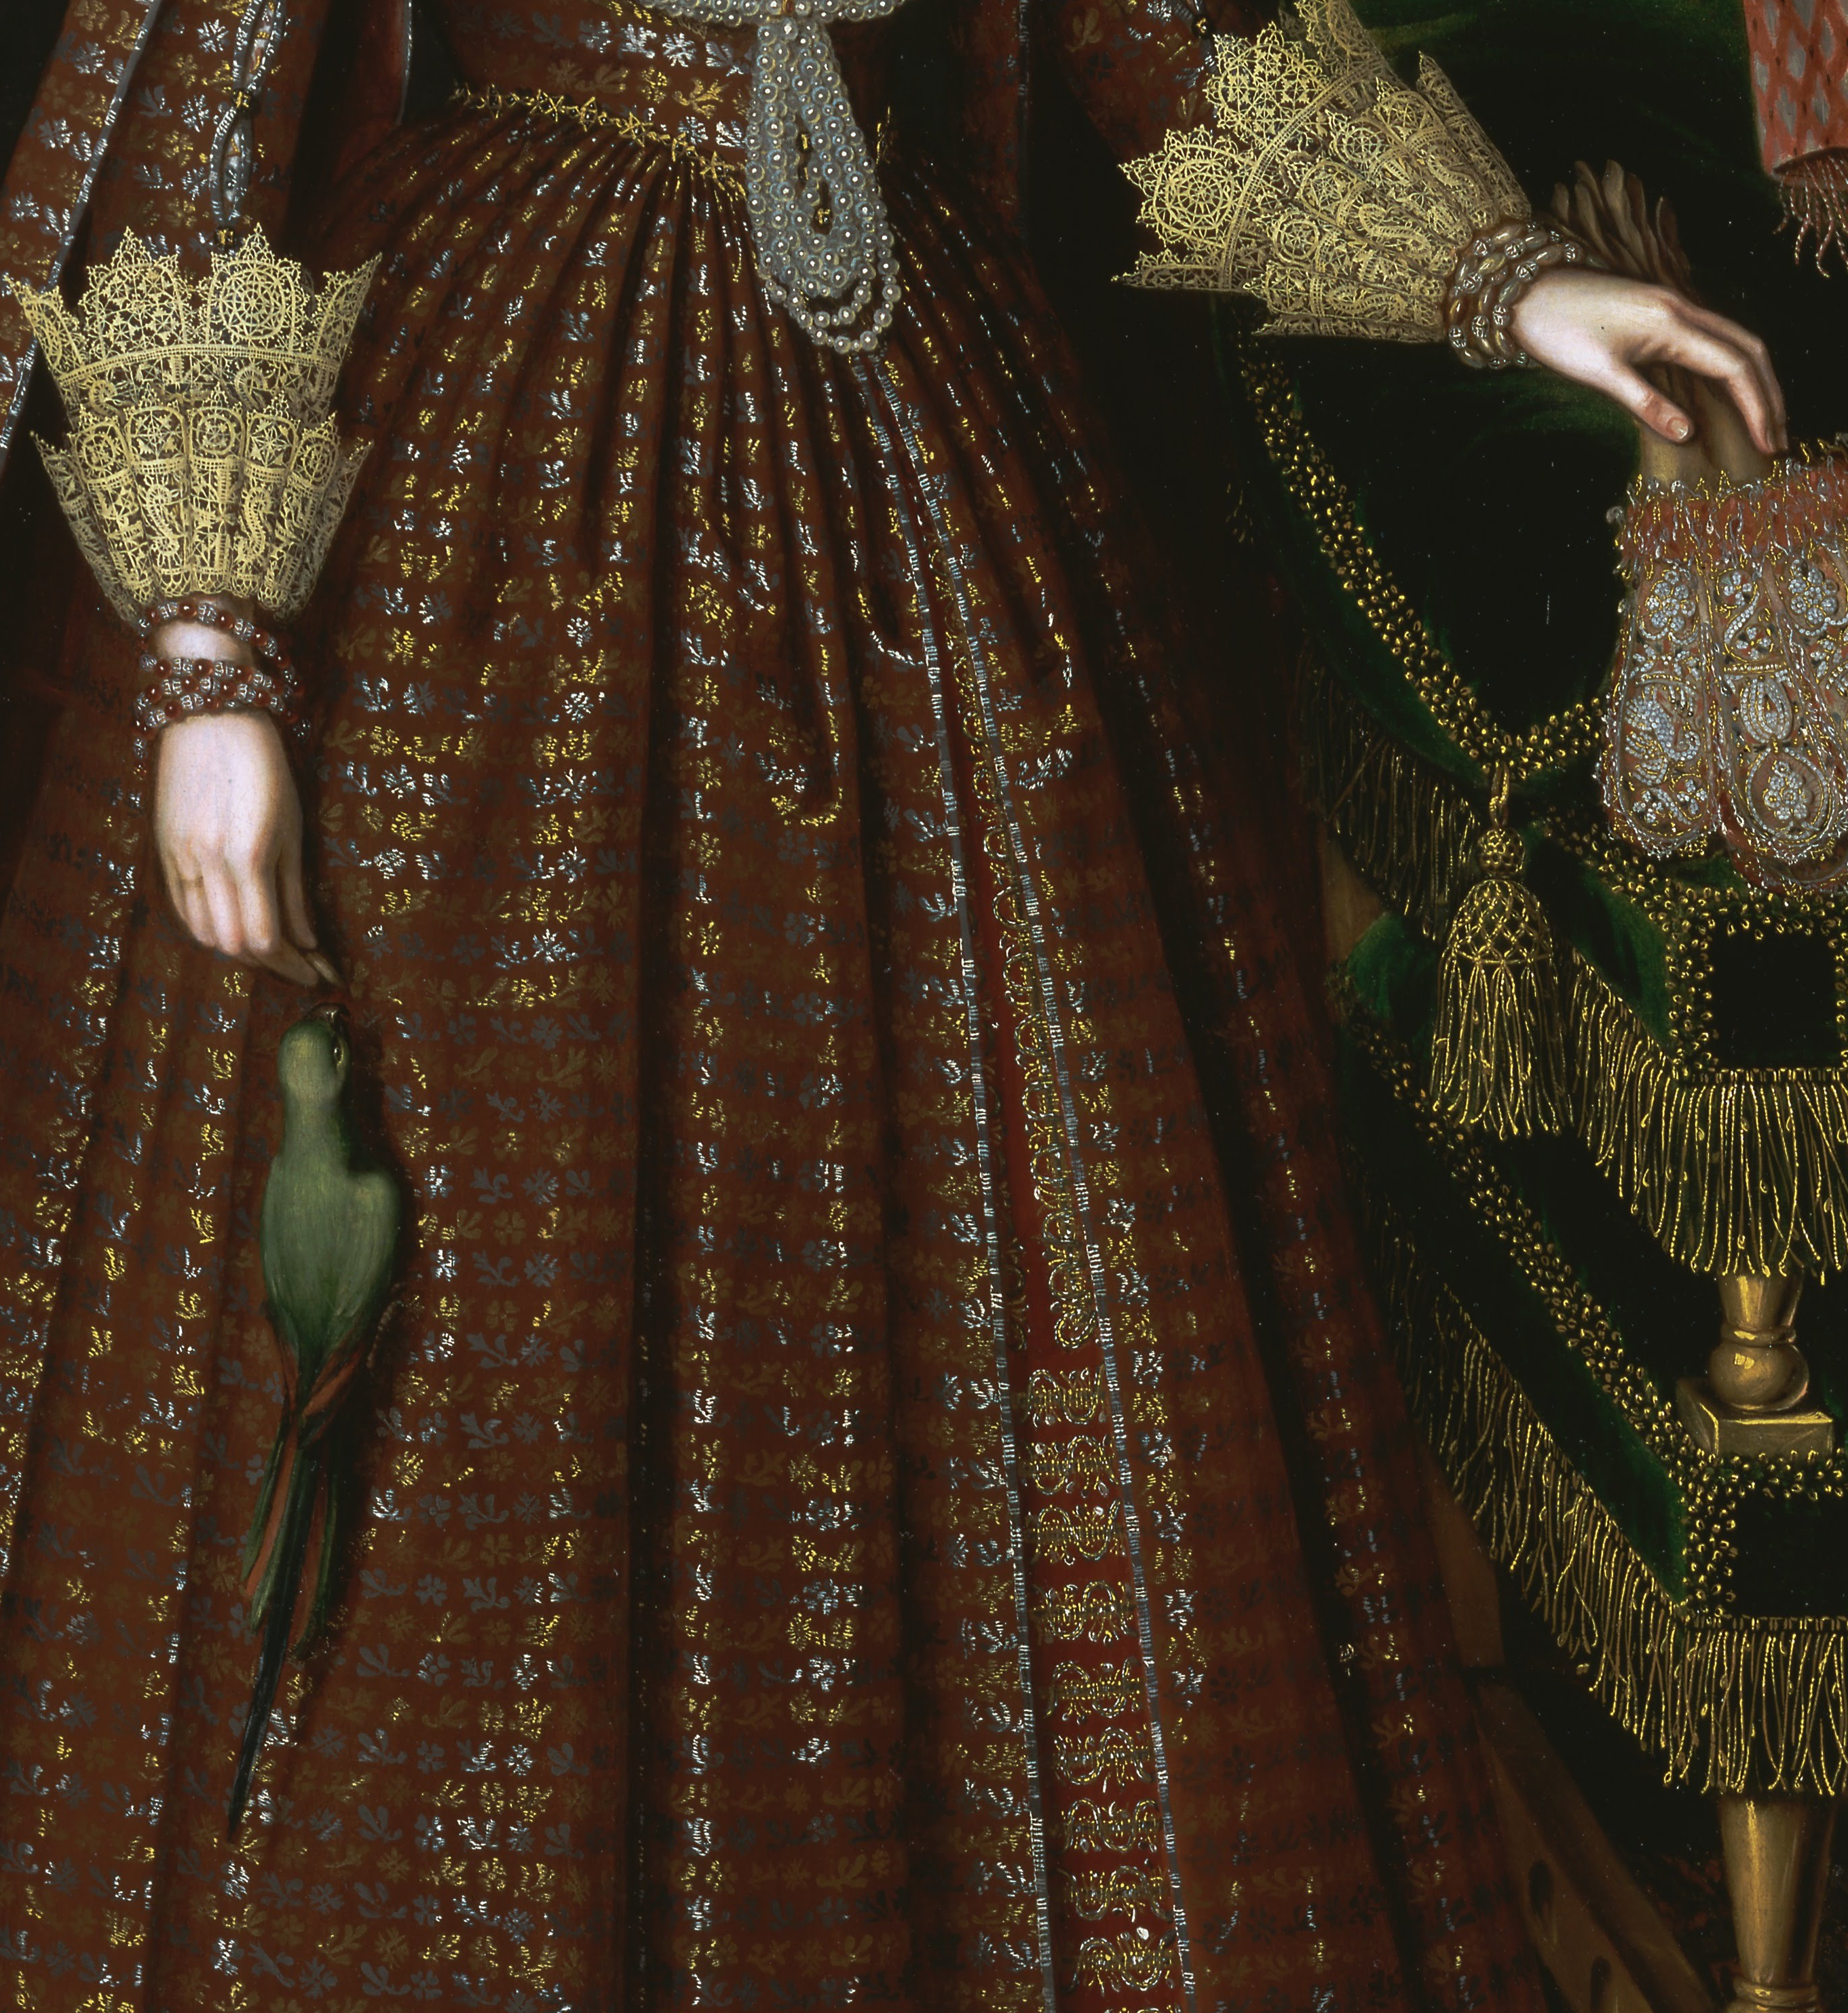 Elizabeth, Countess of Kellie by Paul van Somer, 1619. The Yale Center for British Art.